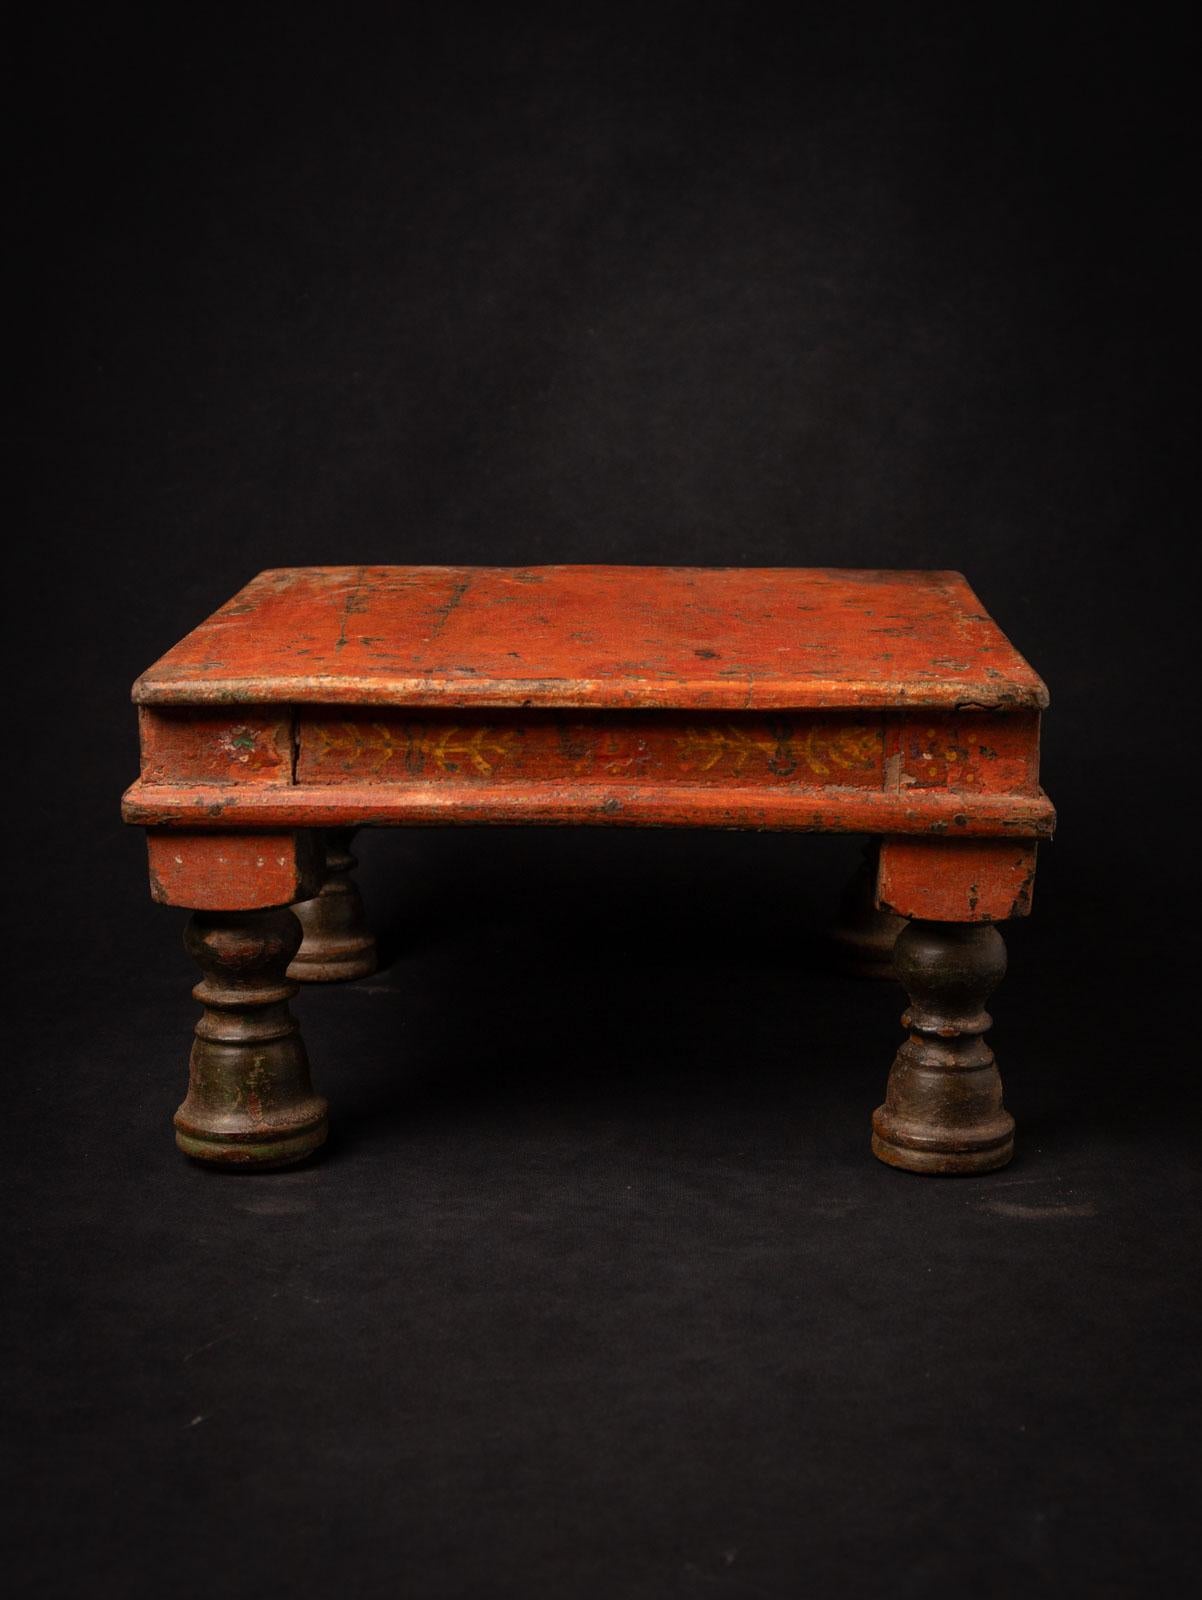 Wood 19th century Antique Indian wooden shrine / table from India